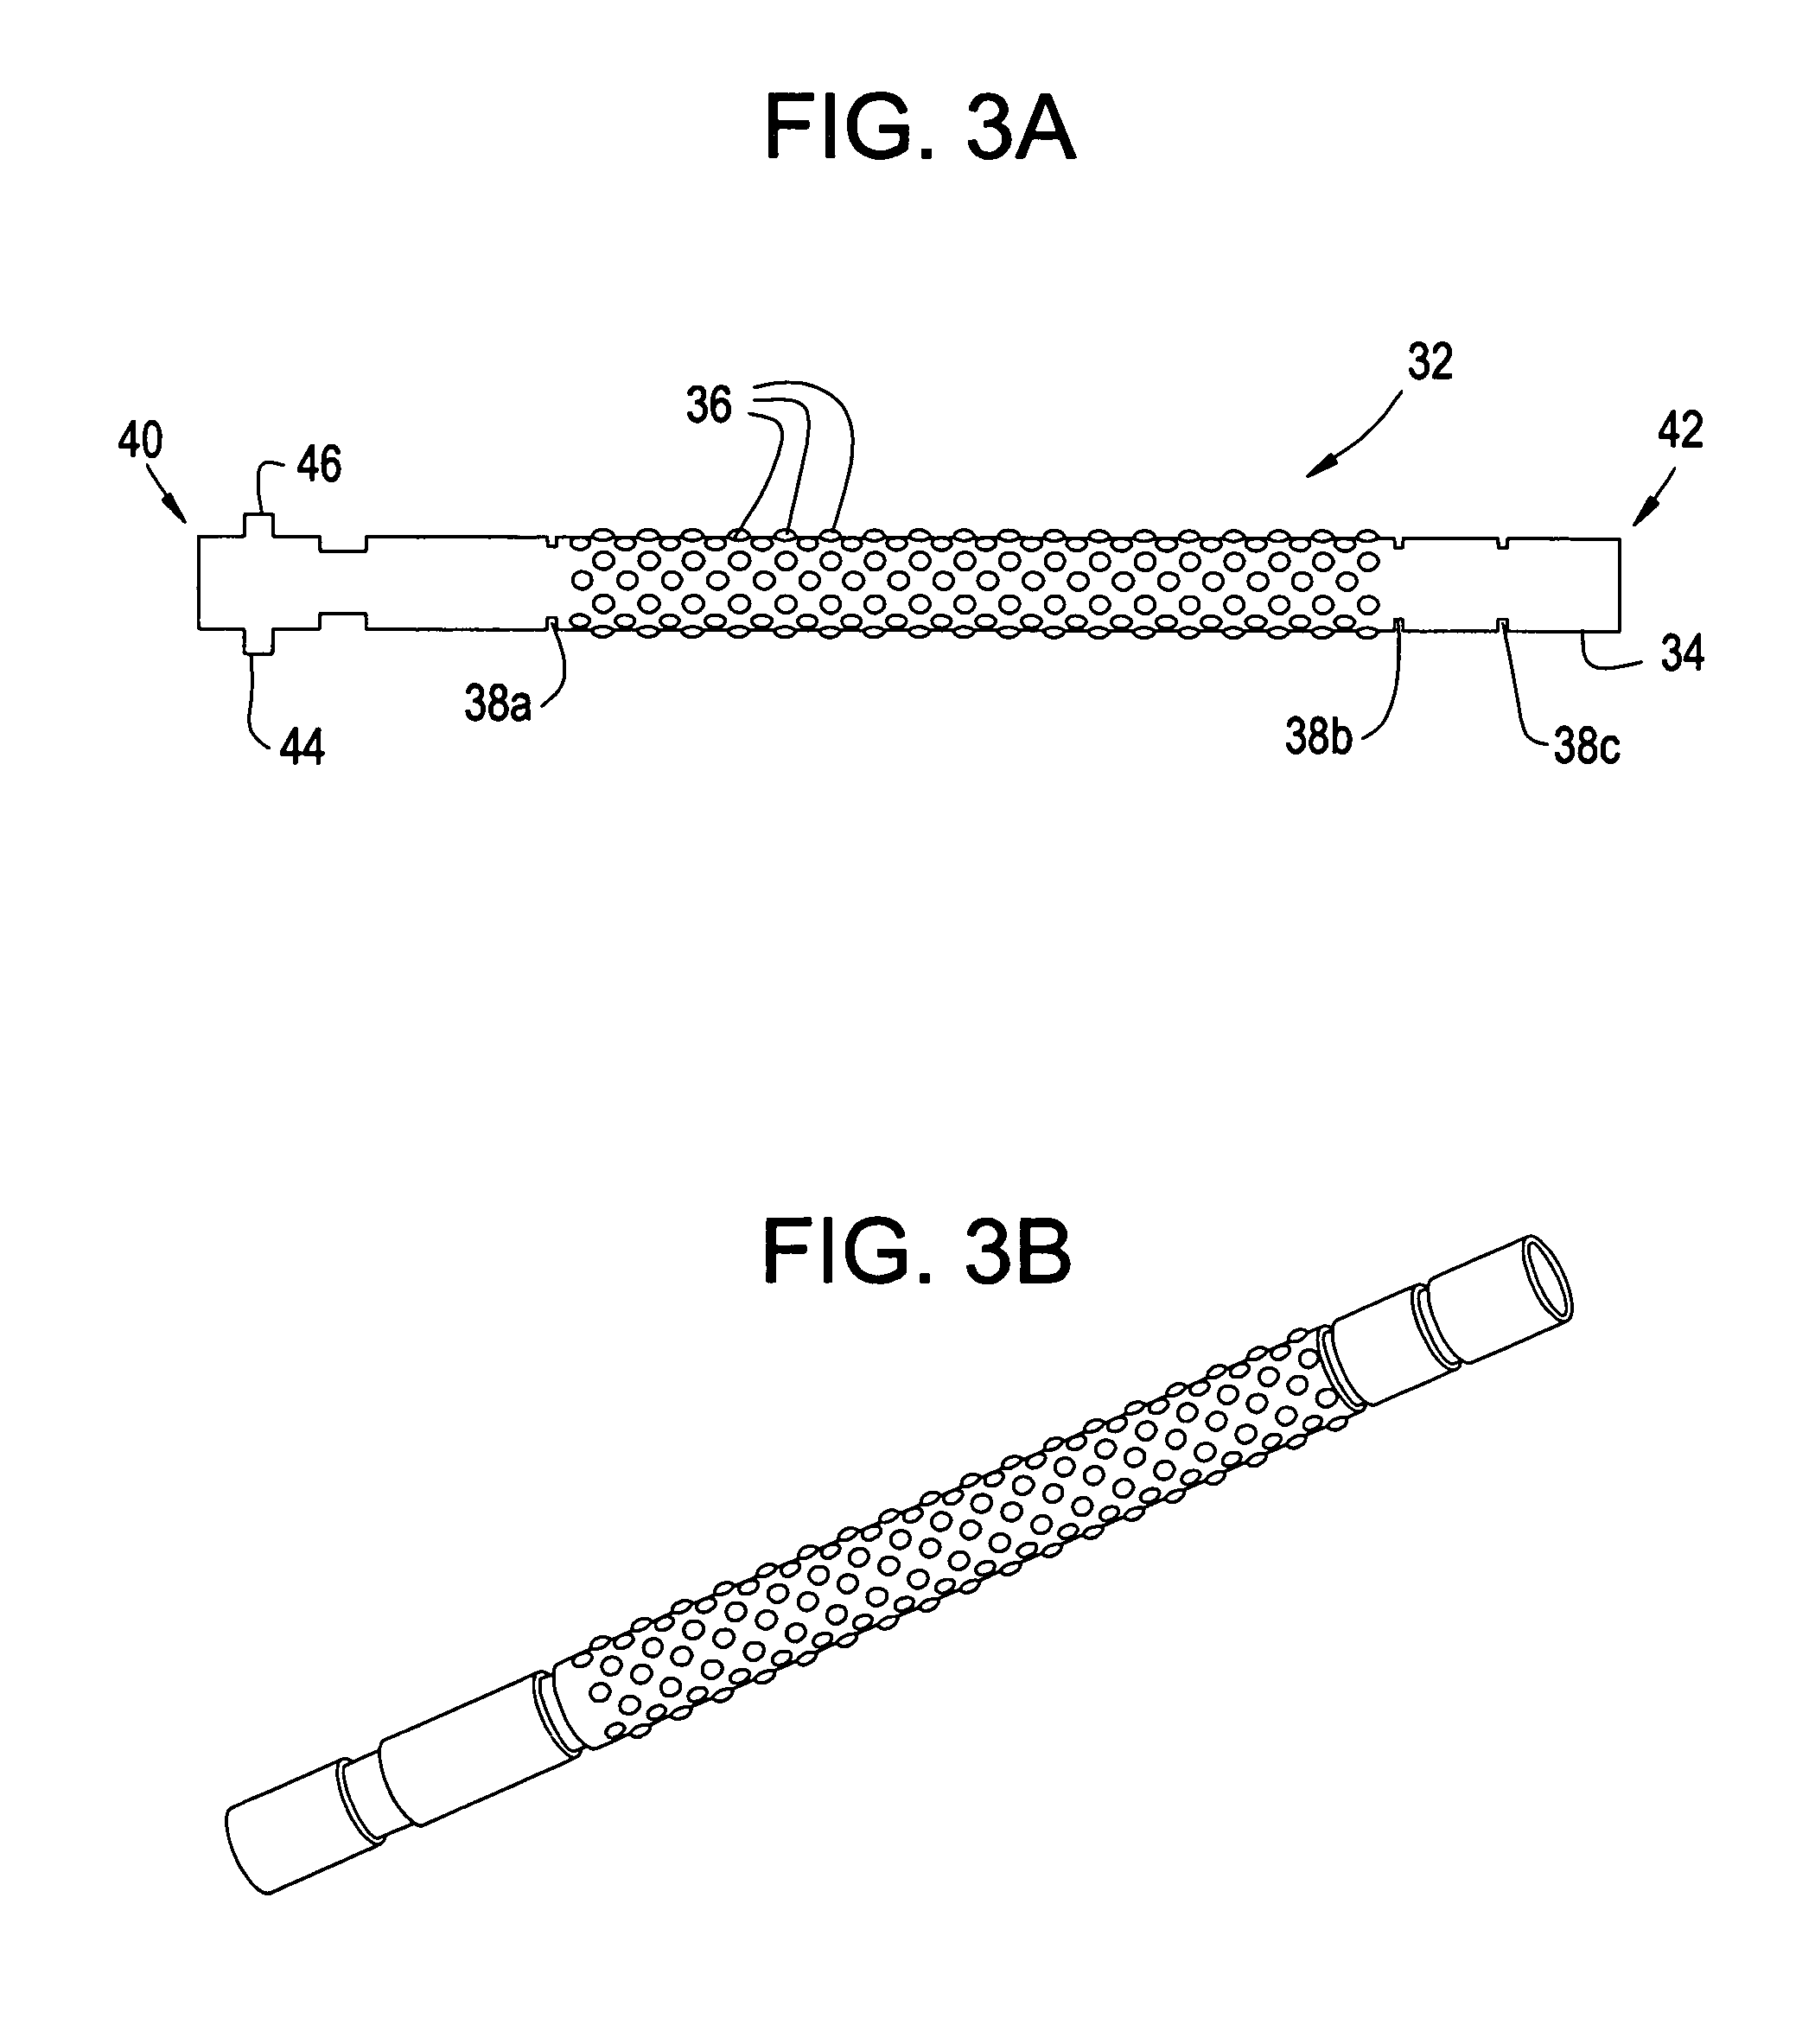 Shaped walls for enhancement of deflagration-to-detonation transition